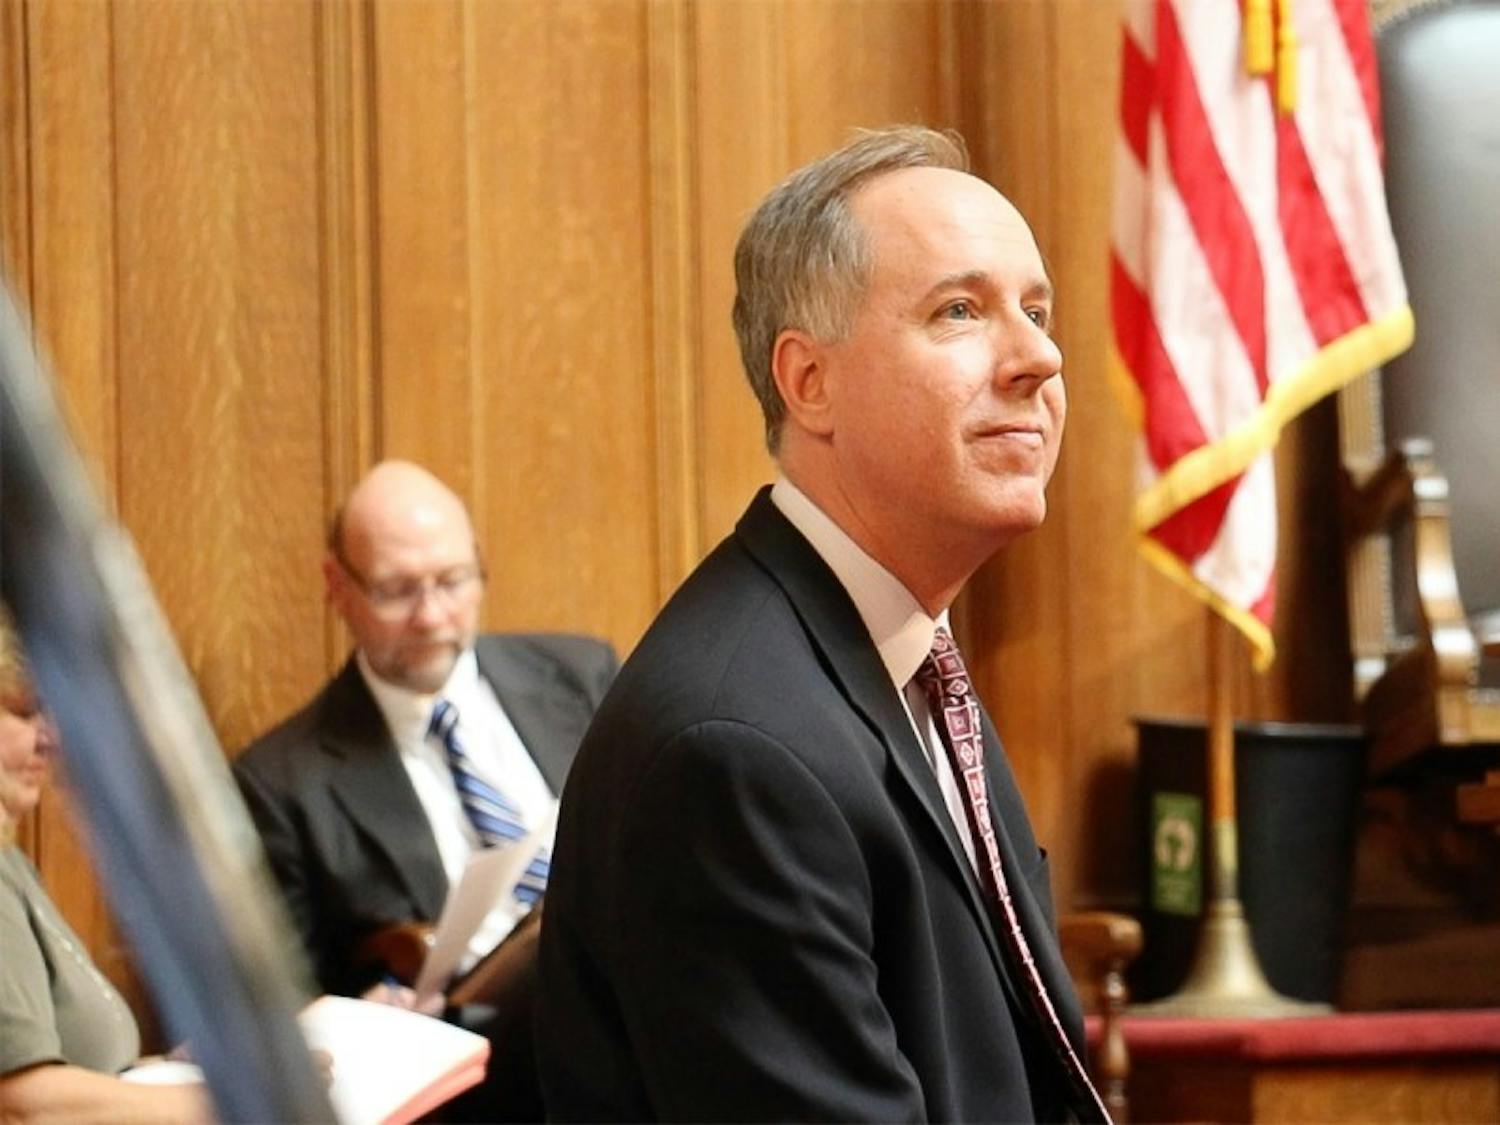 Majority Speaker Rep. Robin Vos, R-Rochester, sent a letter to Evers “respectfully demanding” he change the special election date of former U.S. Rep. Sean Duffy’s Congressional seat.&nbsp;